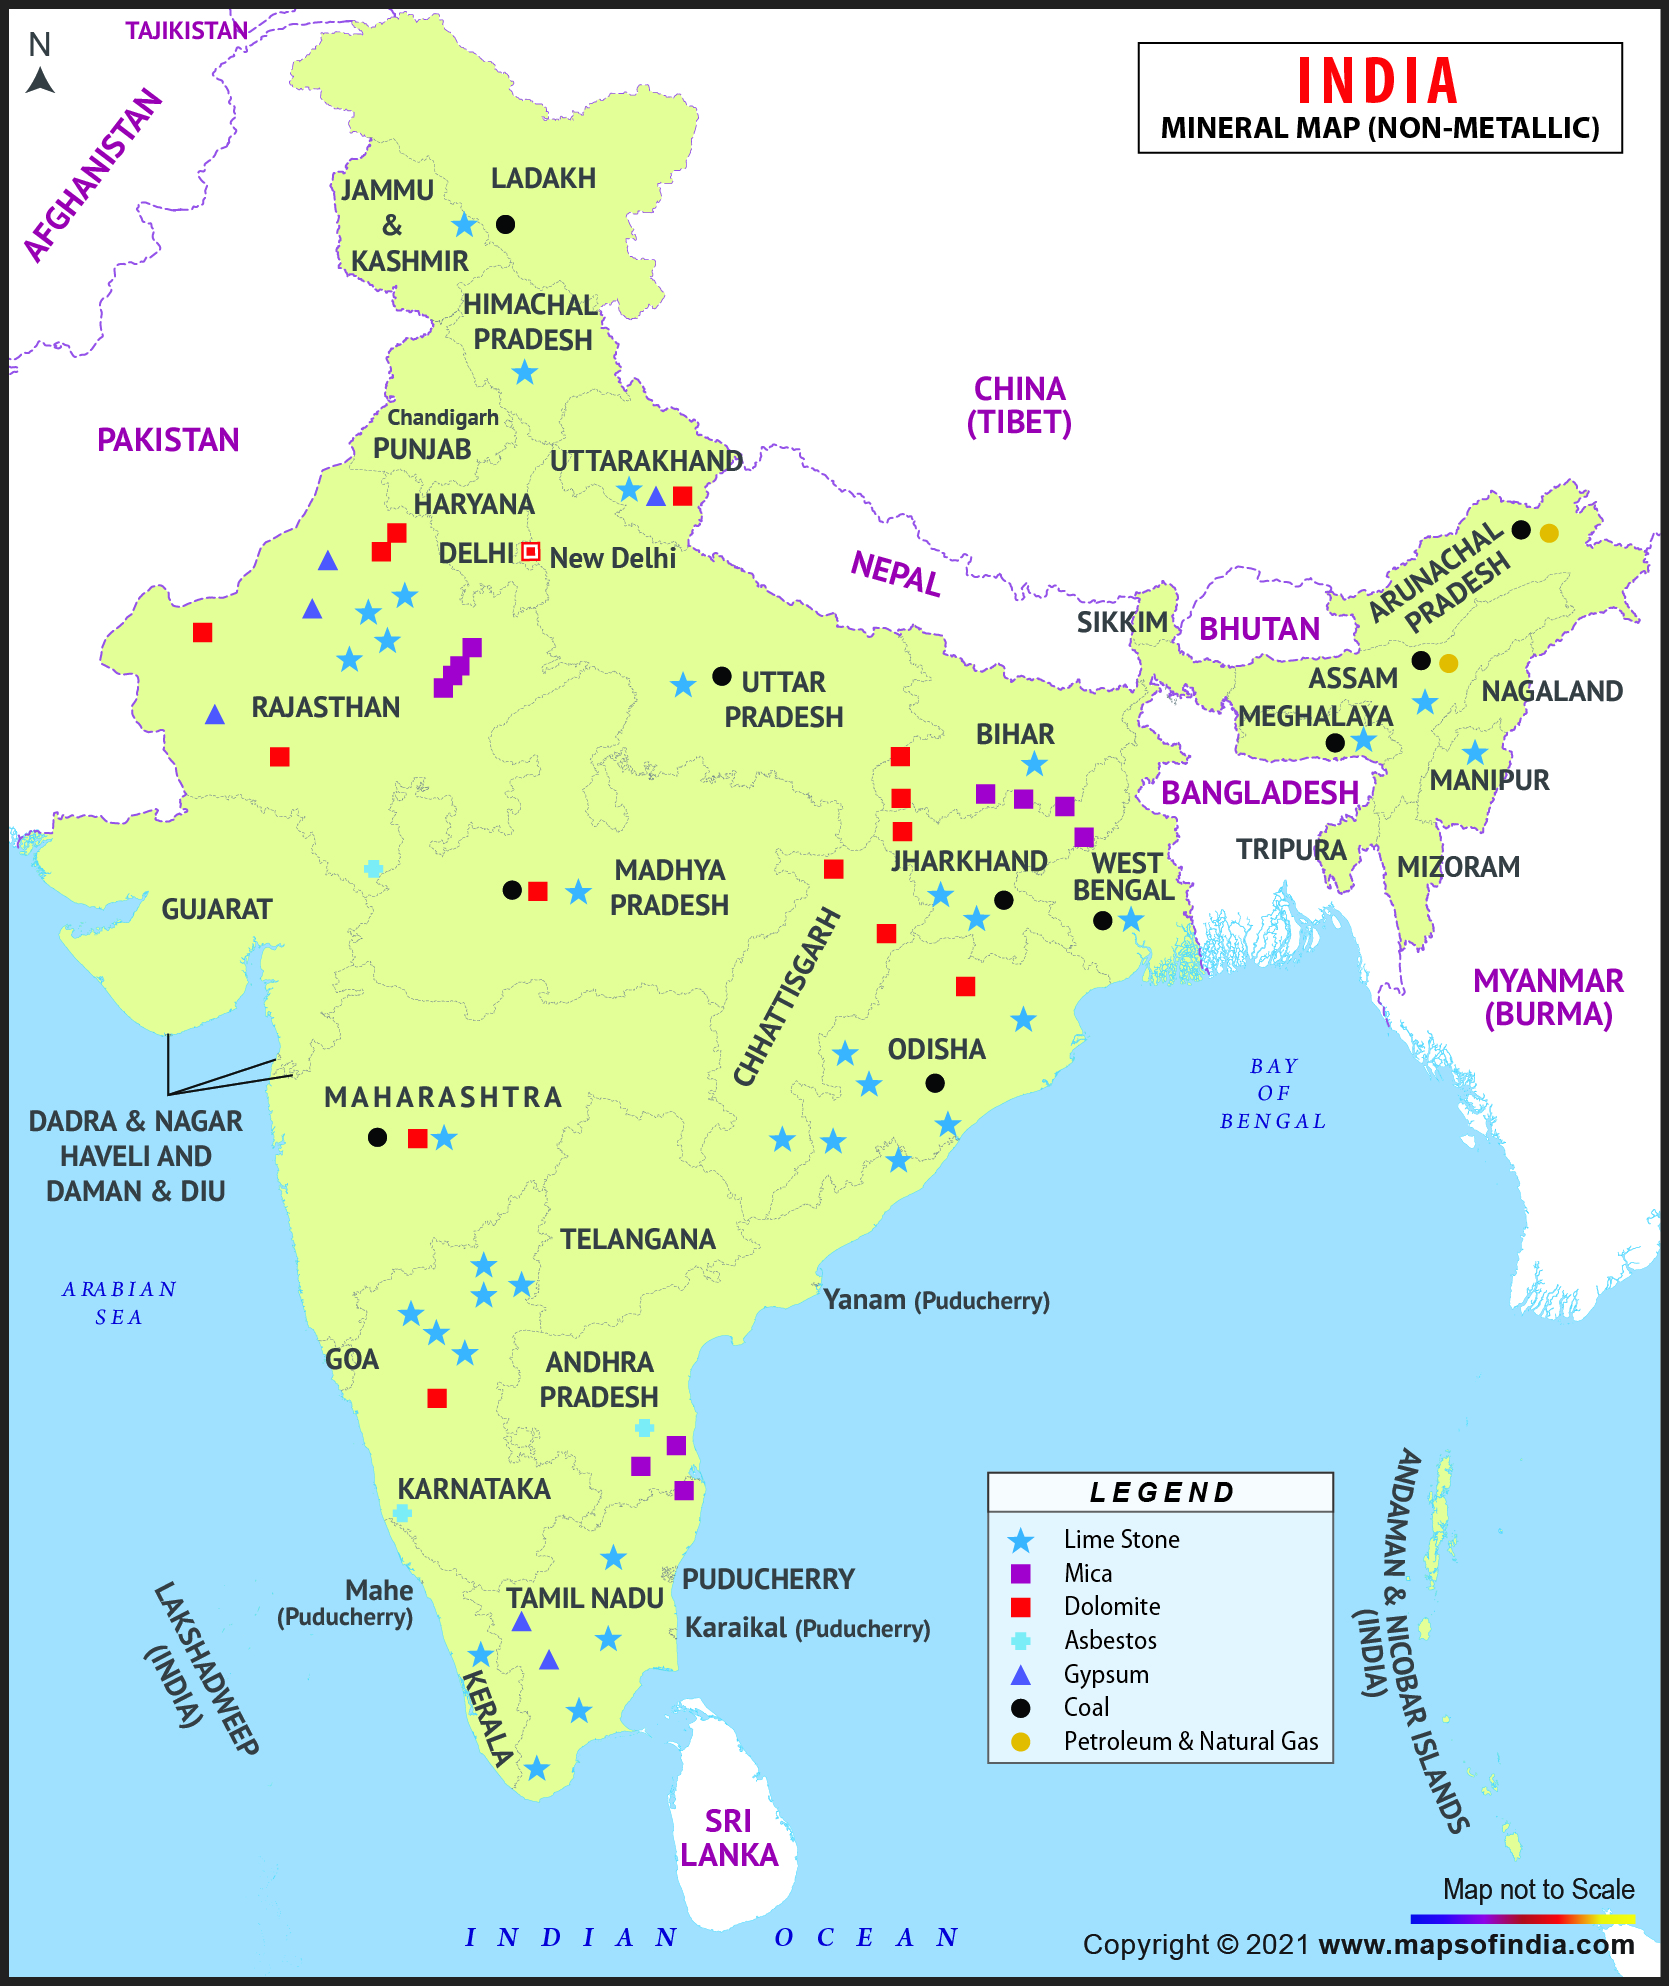 Map of Non Metallic Minerals in India